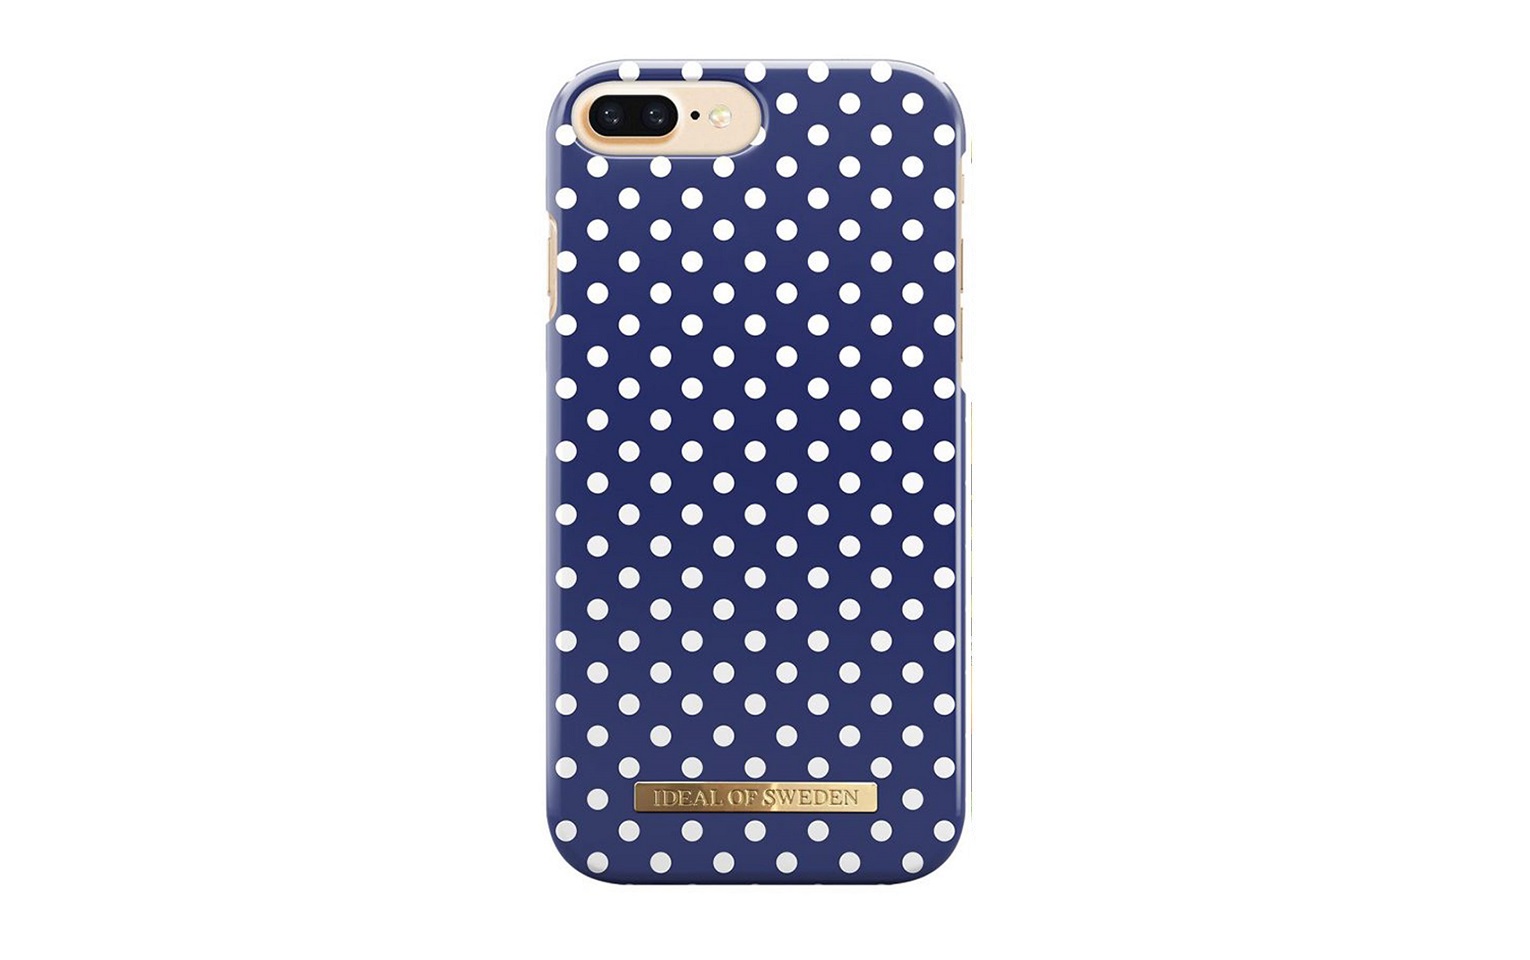 iDeal Fashion Case S/S17 Blue Polka Dots For iPhone 8/7 Plus